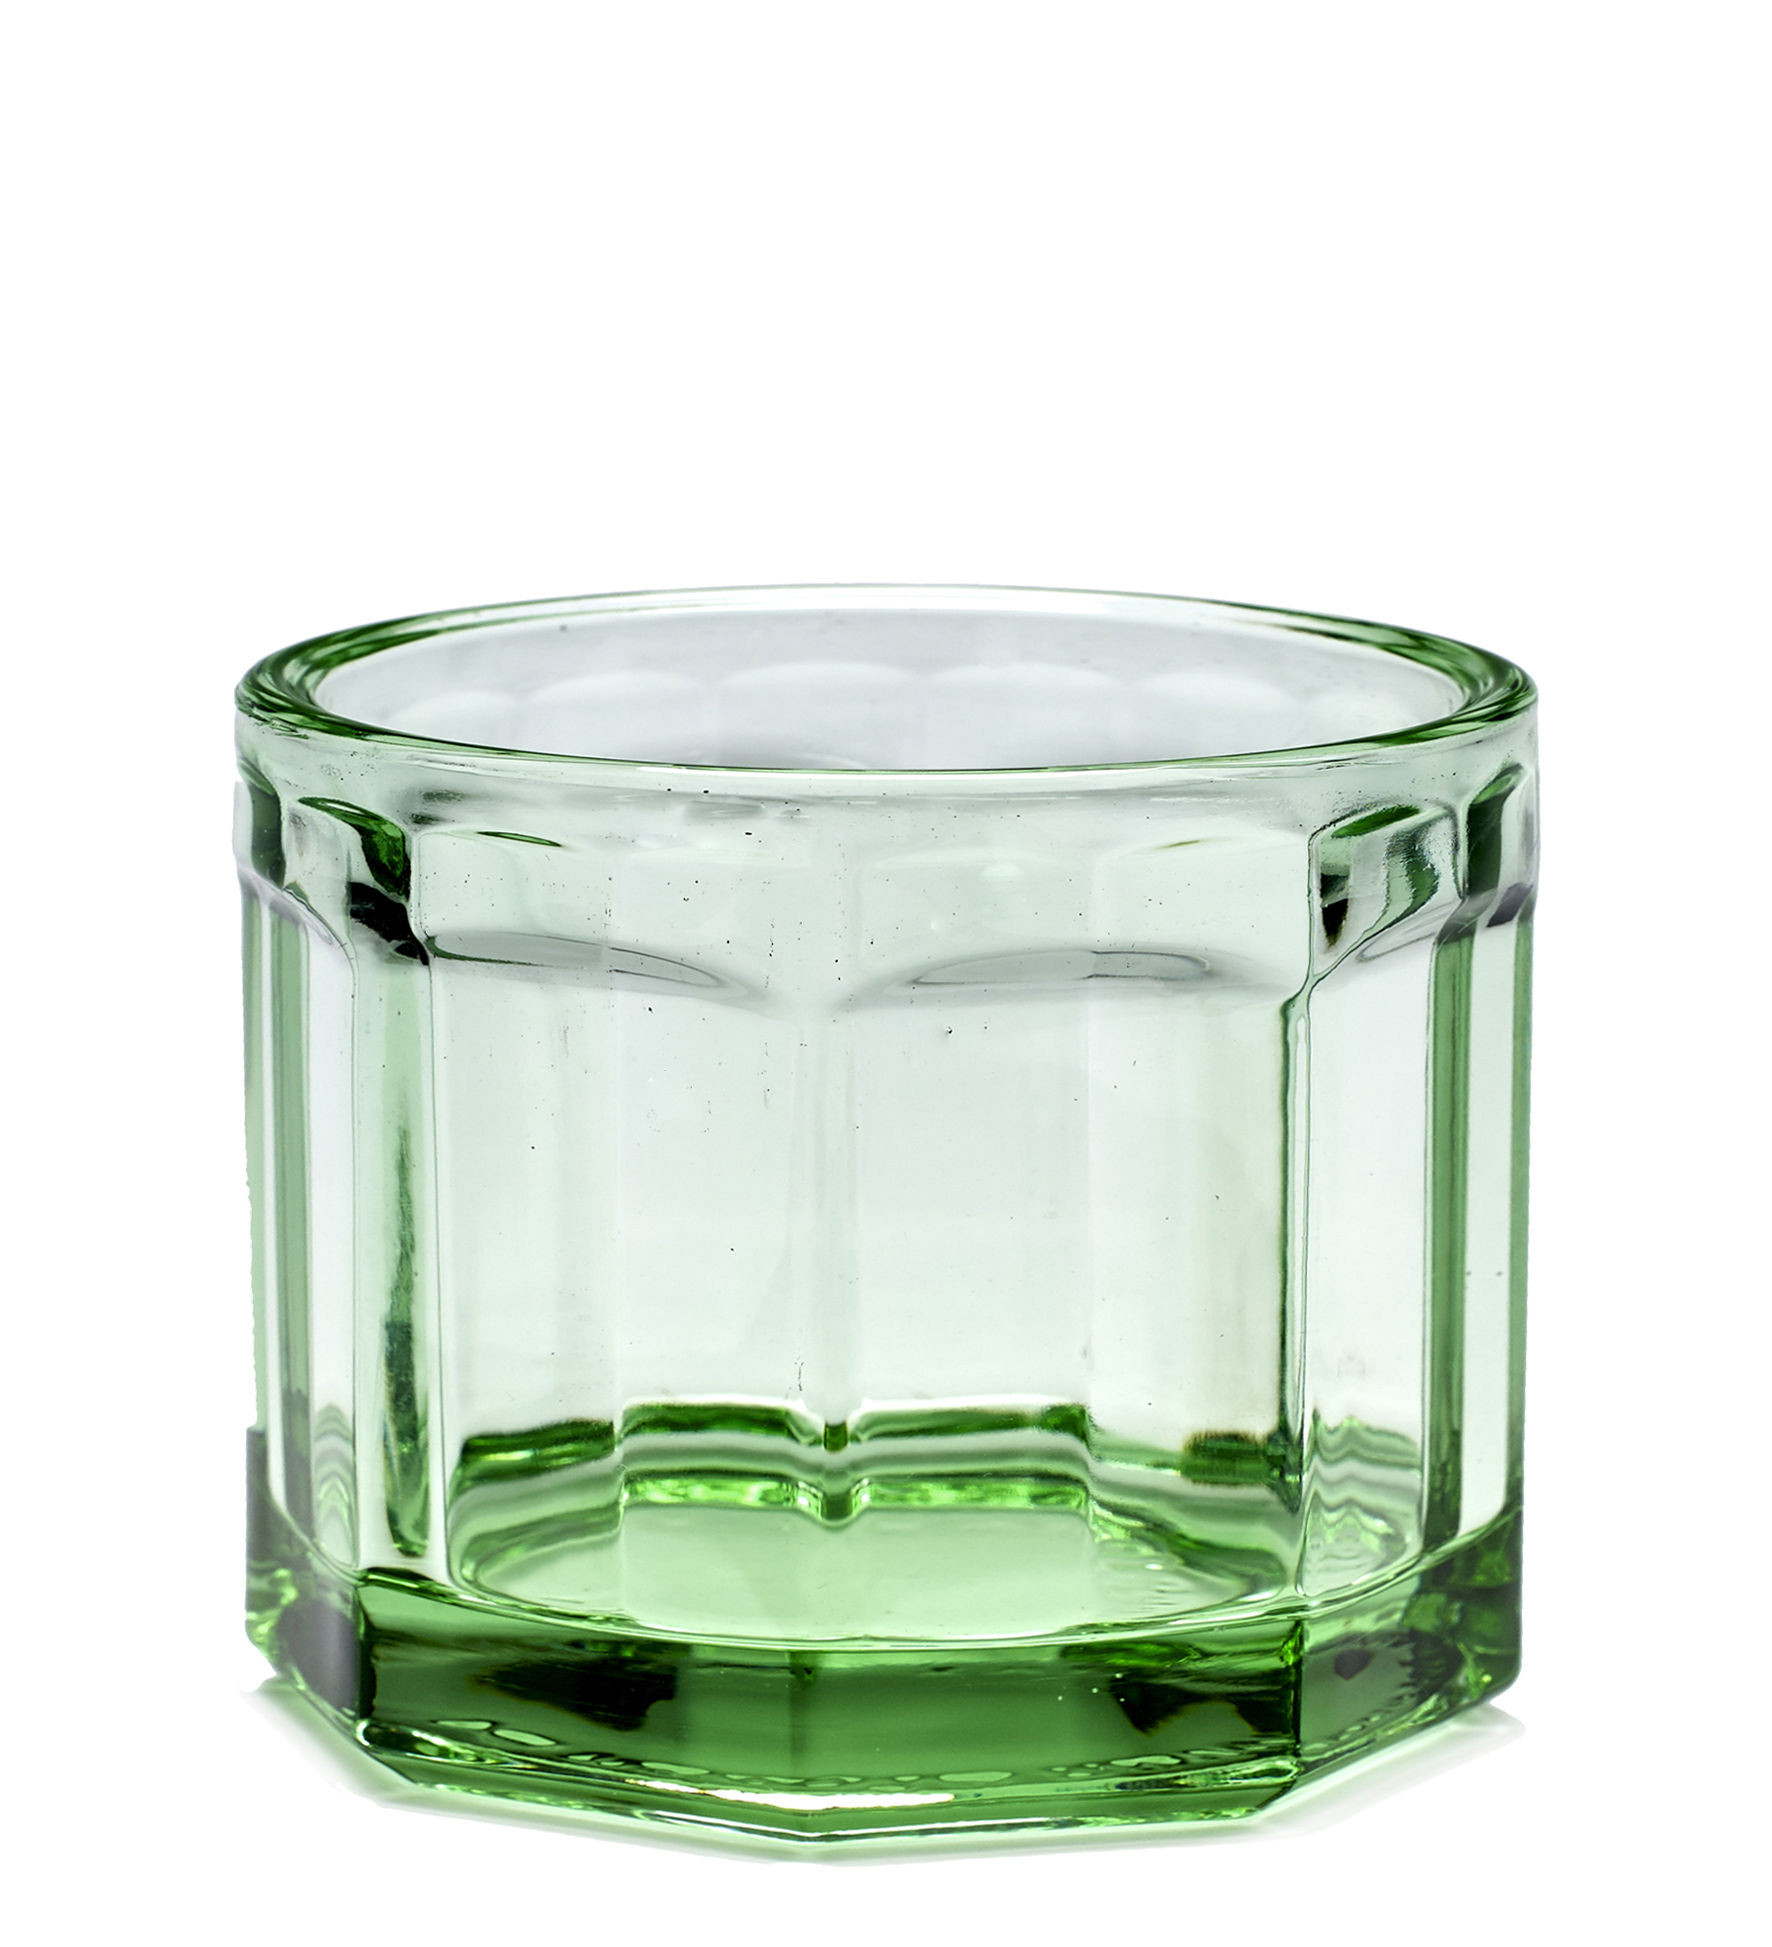 24 Amazing 16 Glass Cylinder Vase 2024 free download 16 glass cylinder vase of fish fish small glass 16 cl transparent green by serax made in in fish fish small glass 16 cl transparent green by serax made in design uk